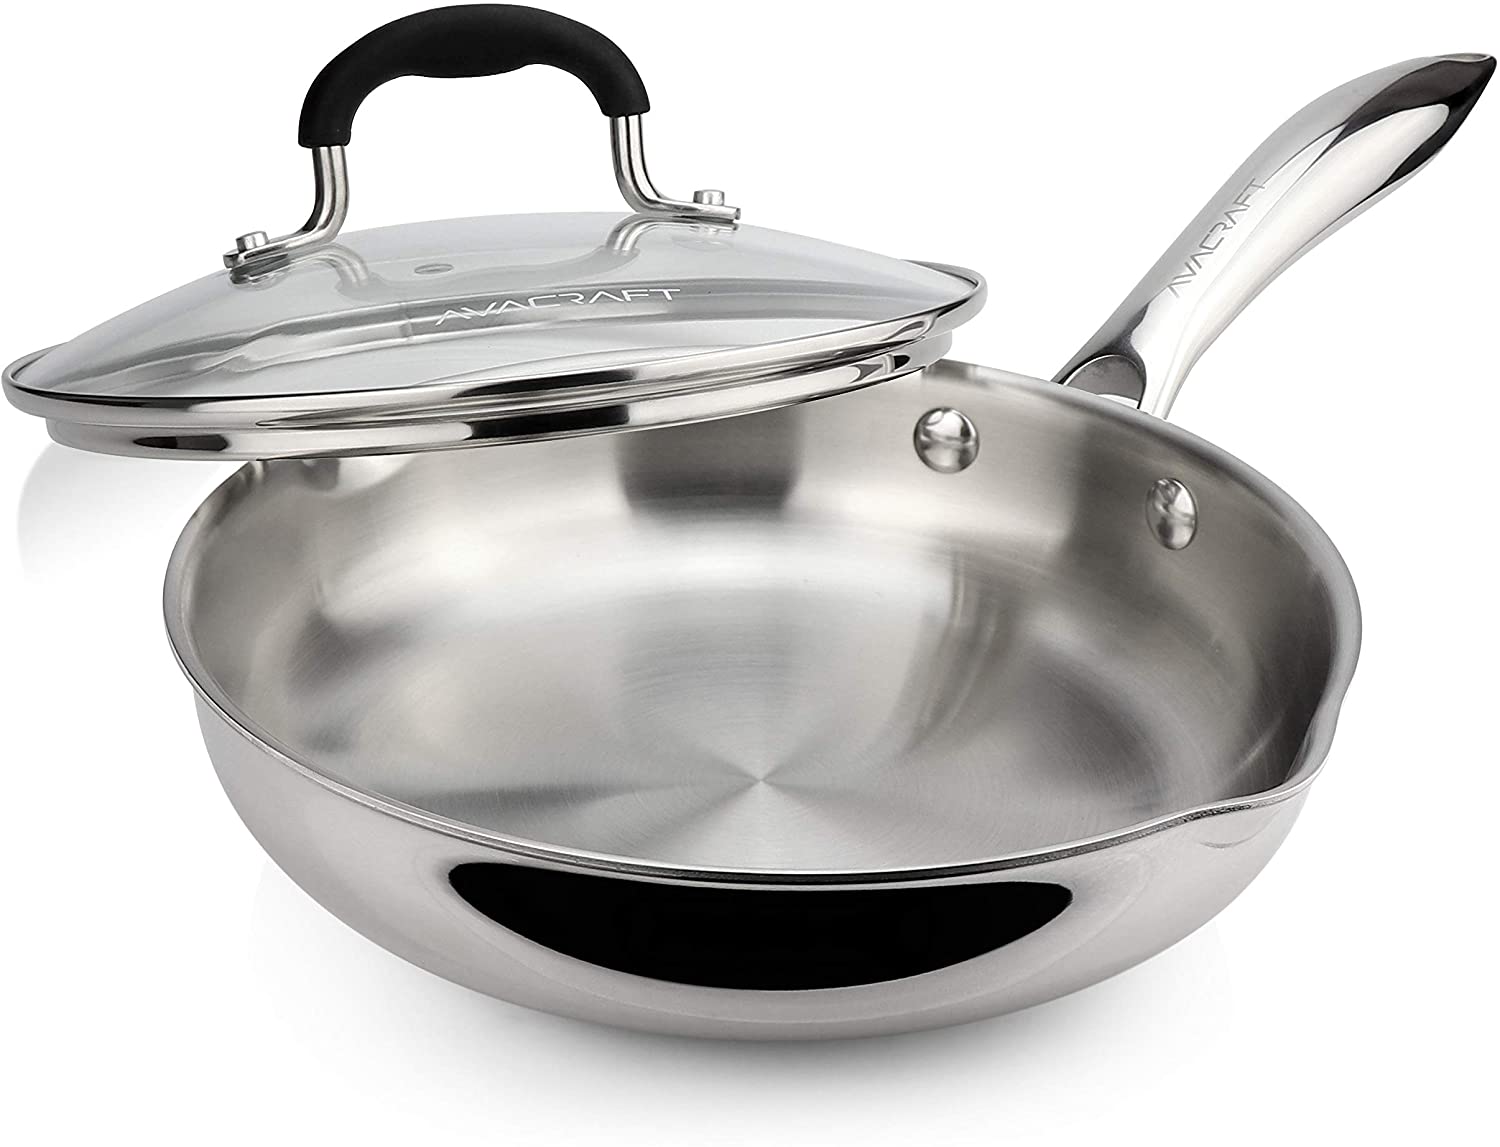 8 Inch Tri-Ply Stainless Steel Frying Pan with Lid, Side Spouts, Induction  Pan